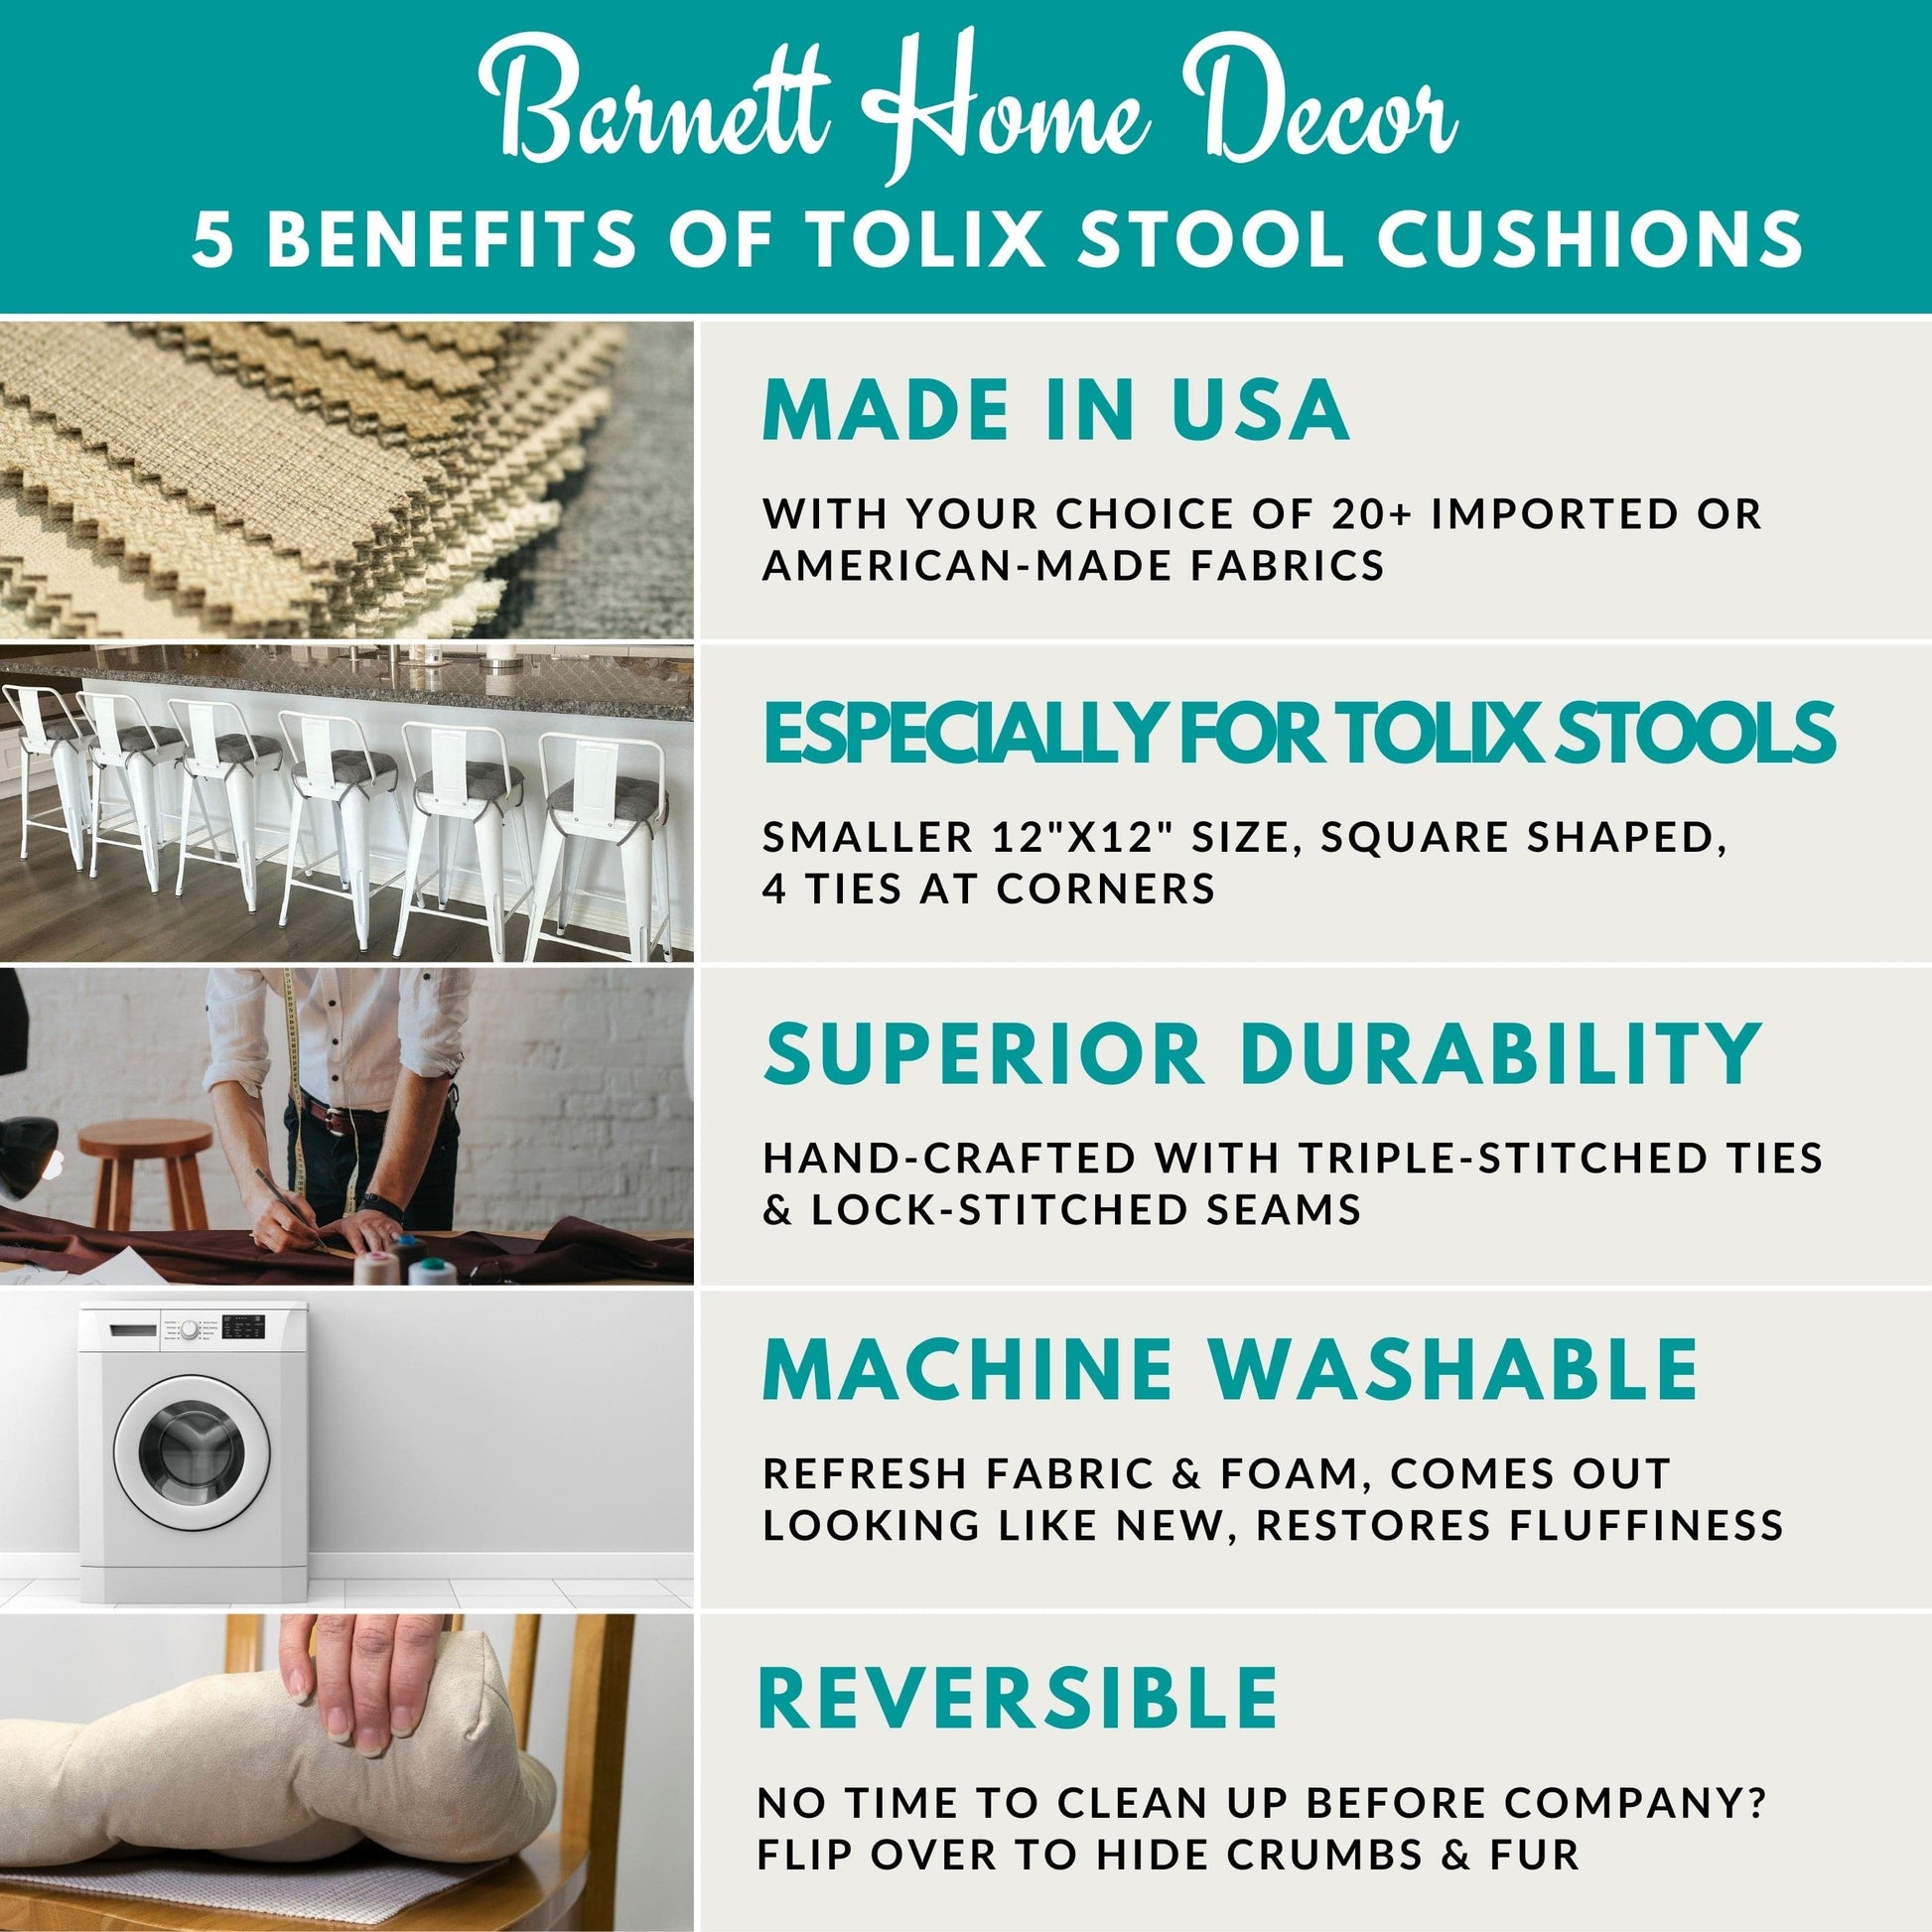 Barnett Home Decor Benefits of Tolix Cushions, Made in USA, Made for Tolix Chairs, Superior Durability, Machine Washable, Reversible 